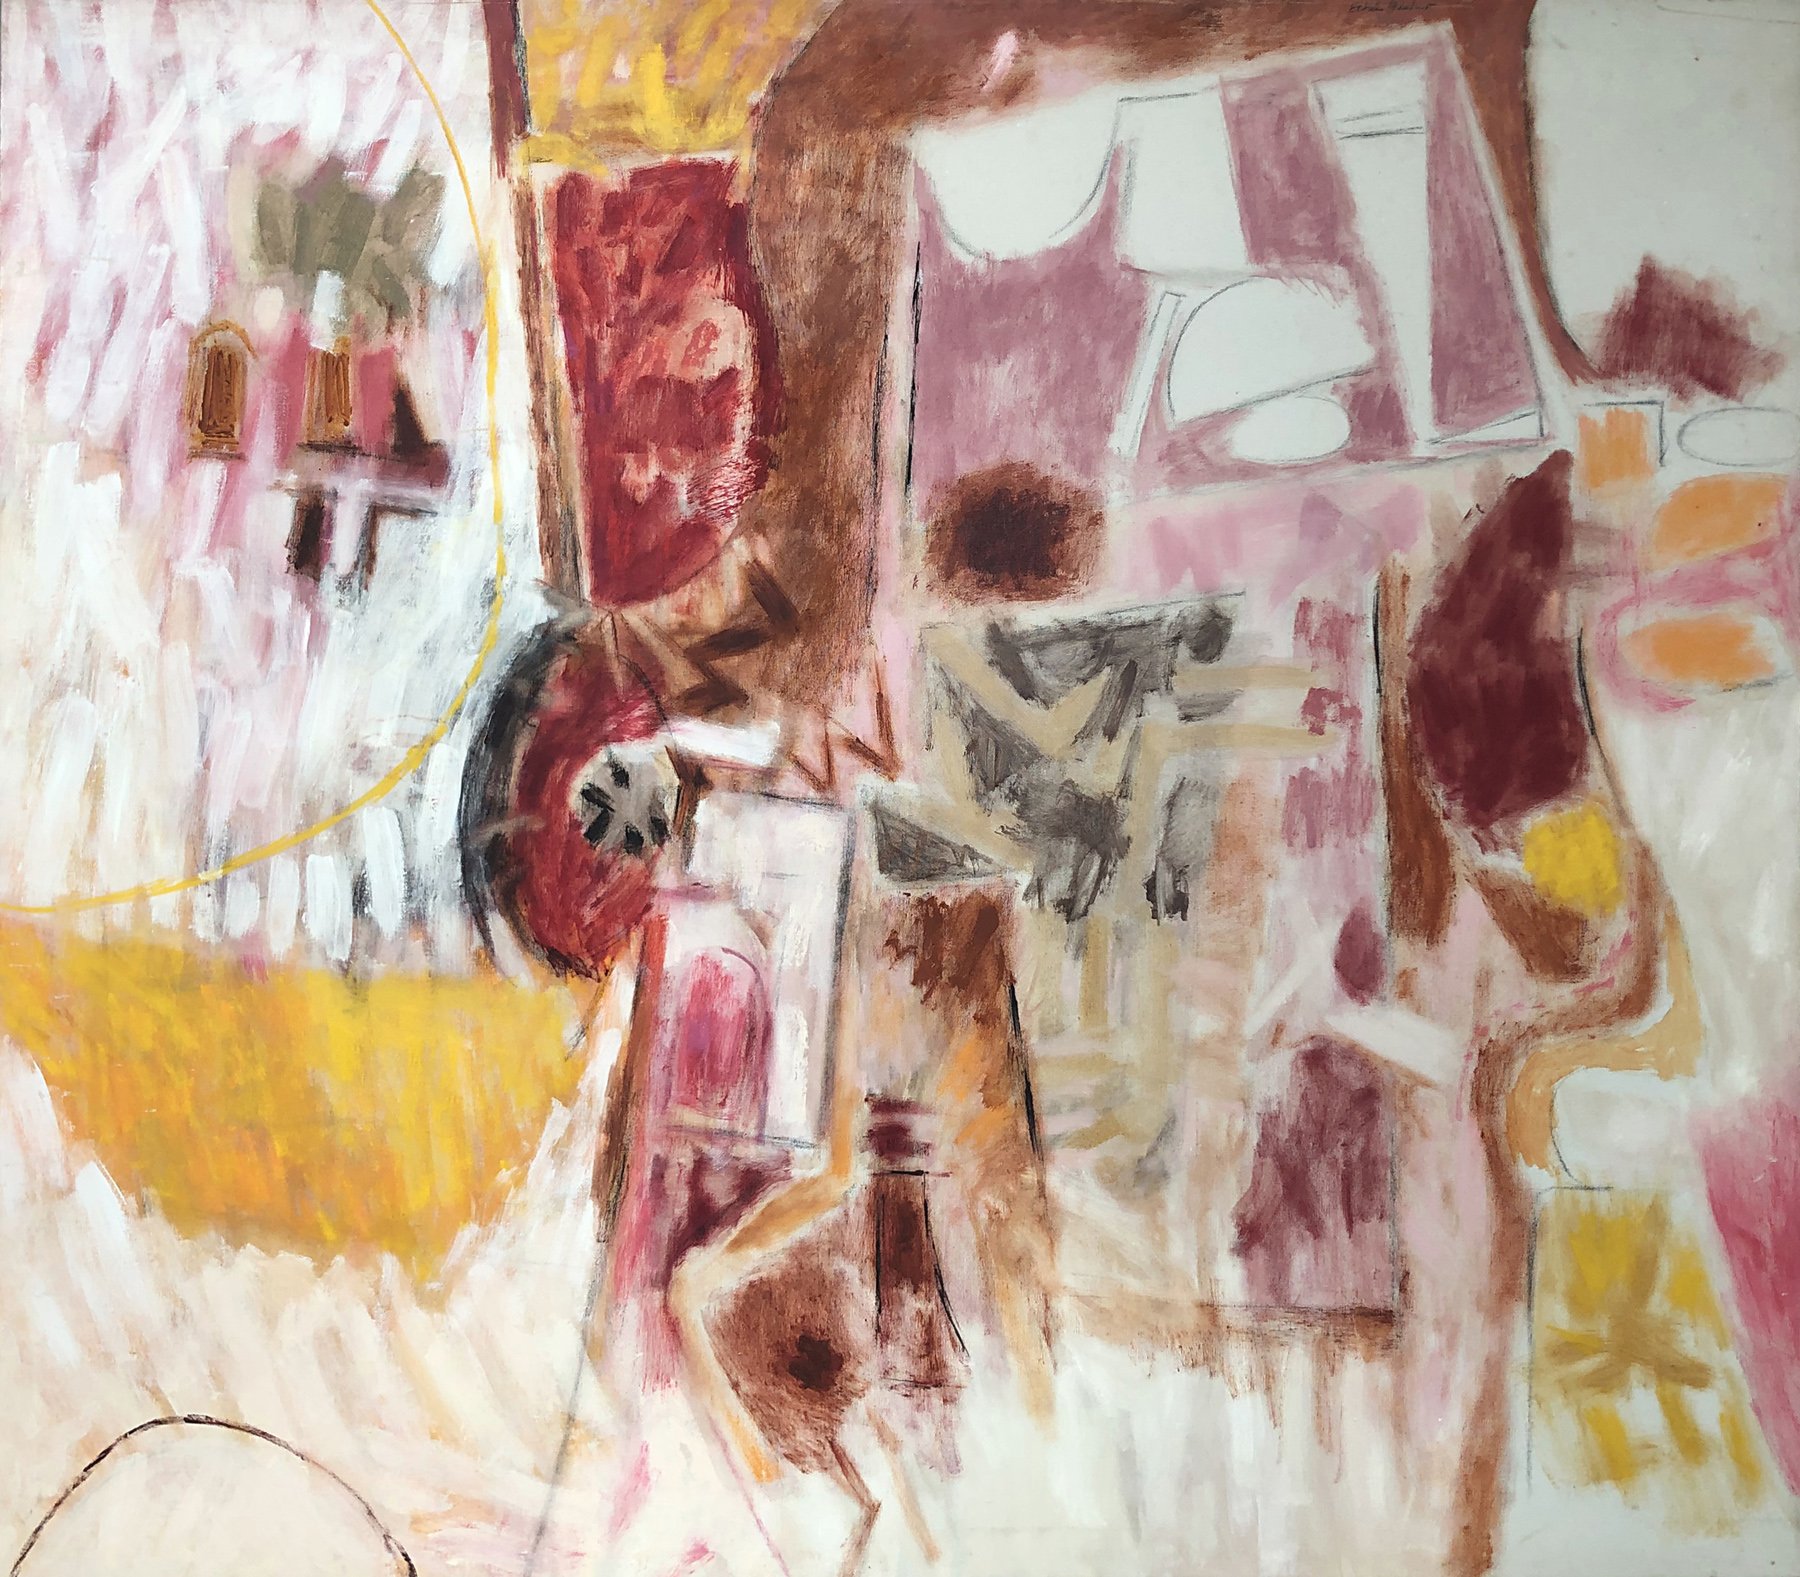 Parade: Abstract Painting by Ethel Fisher, 1959, oil on canvas, 47 x 53 inches, mid-twentieth century abstract painting, widely exhibited in Havana, Cuba.